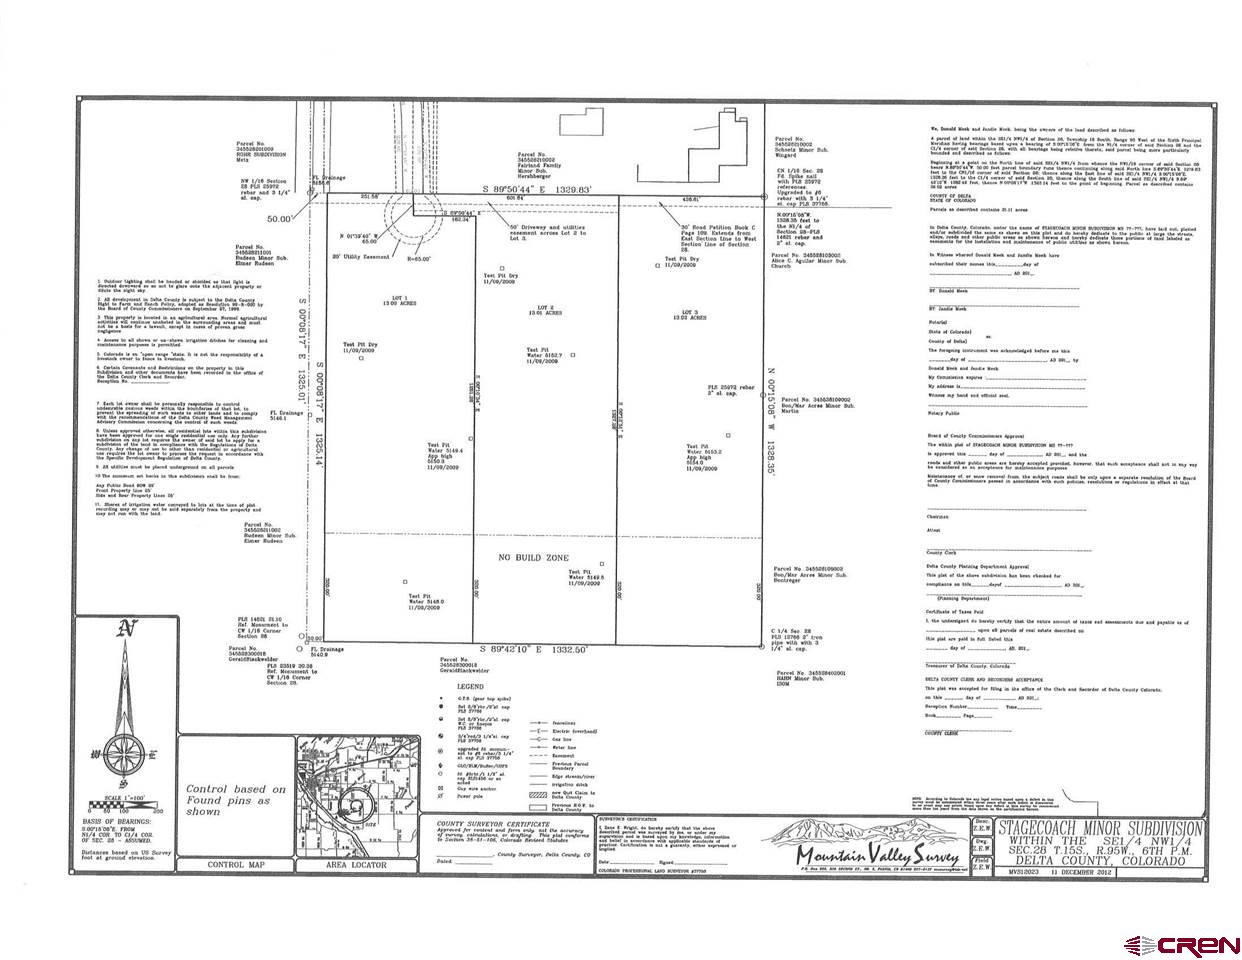 Attention Developers!!! Sellers motivated! This has conditional approval from Delta County.  Stagecoach Minor Subdivision Conditional Approval consisting of three 13 acre lots. Could possibly be subdivided into more lots with County approval. Close to Delta High School, great location!